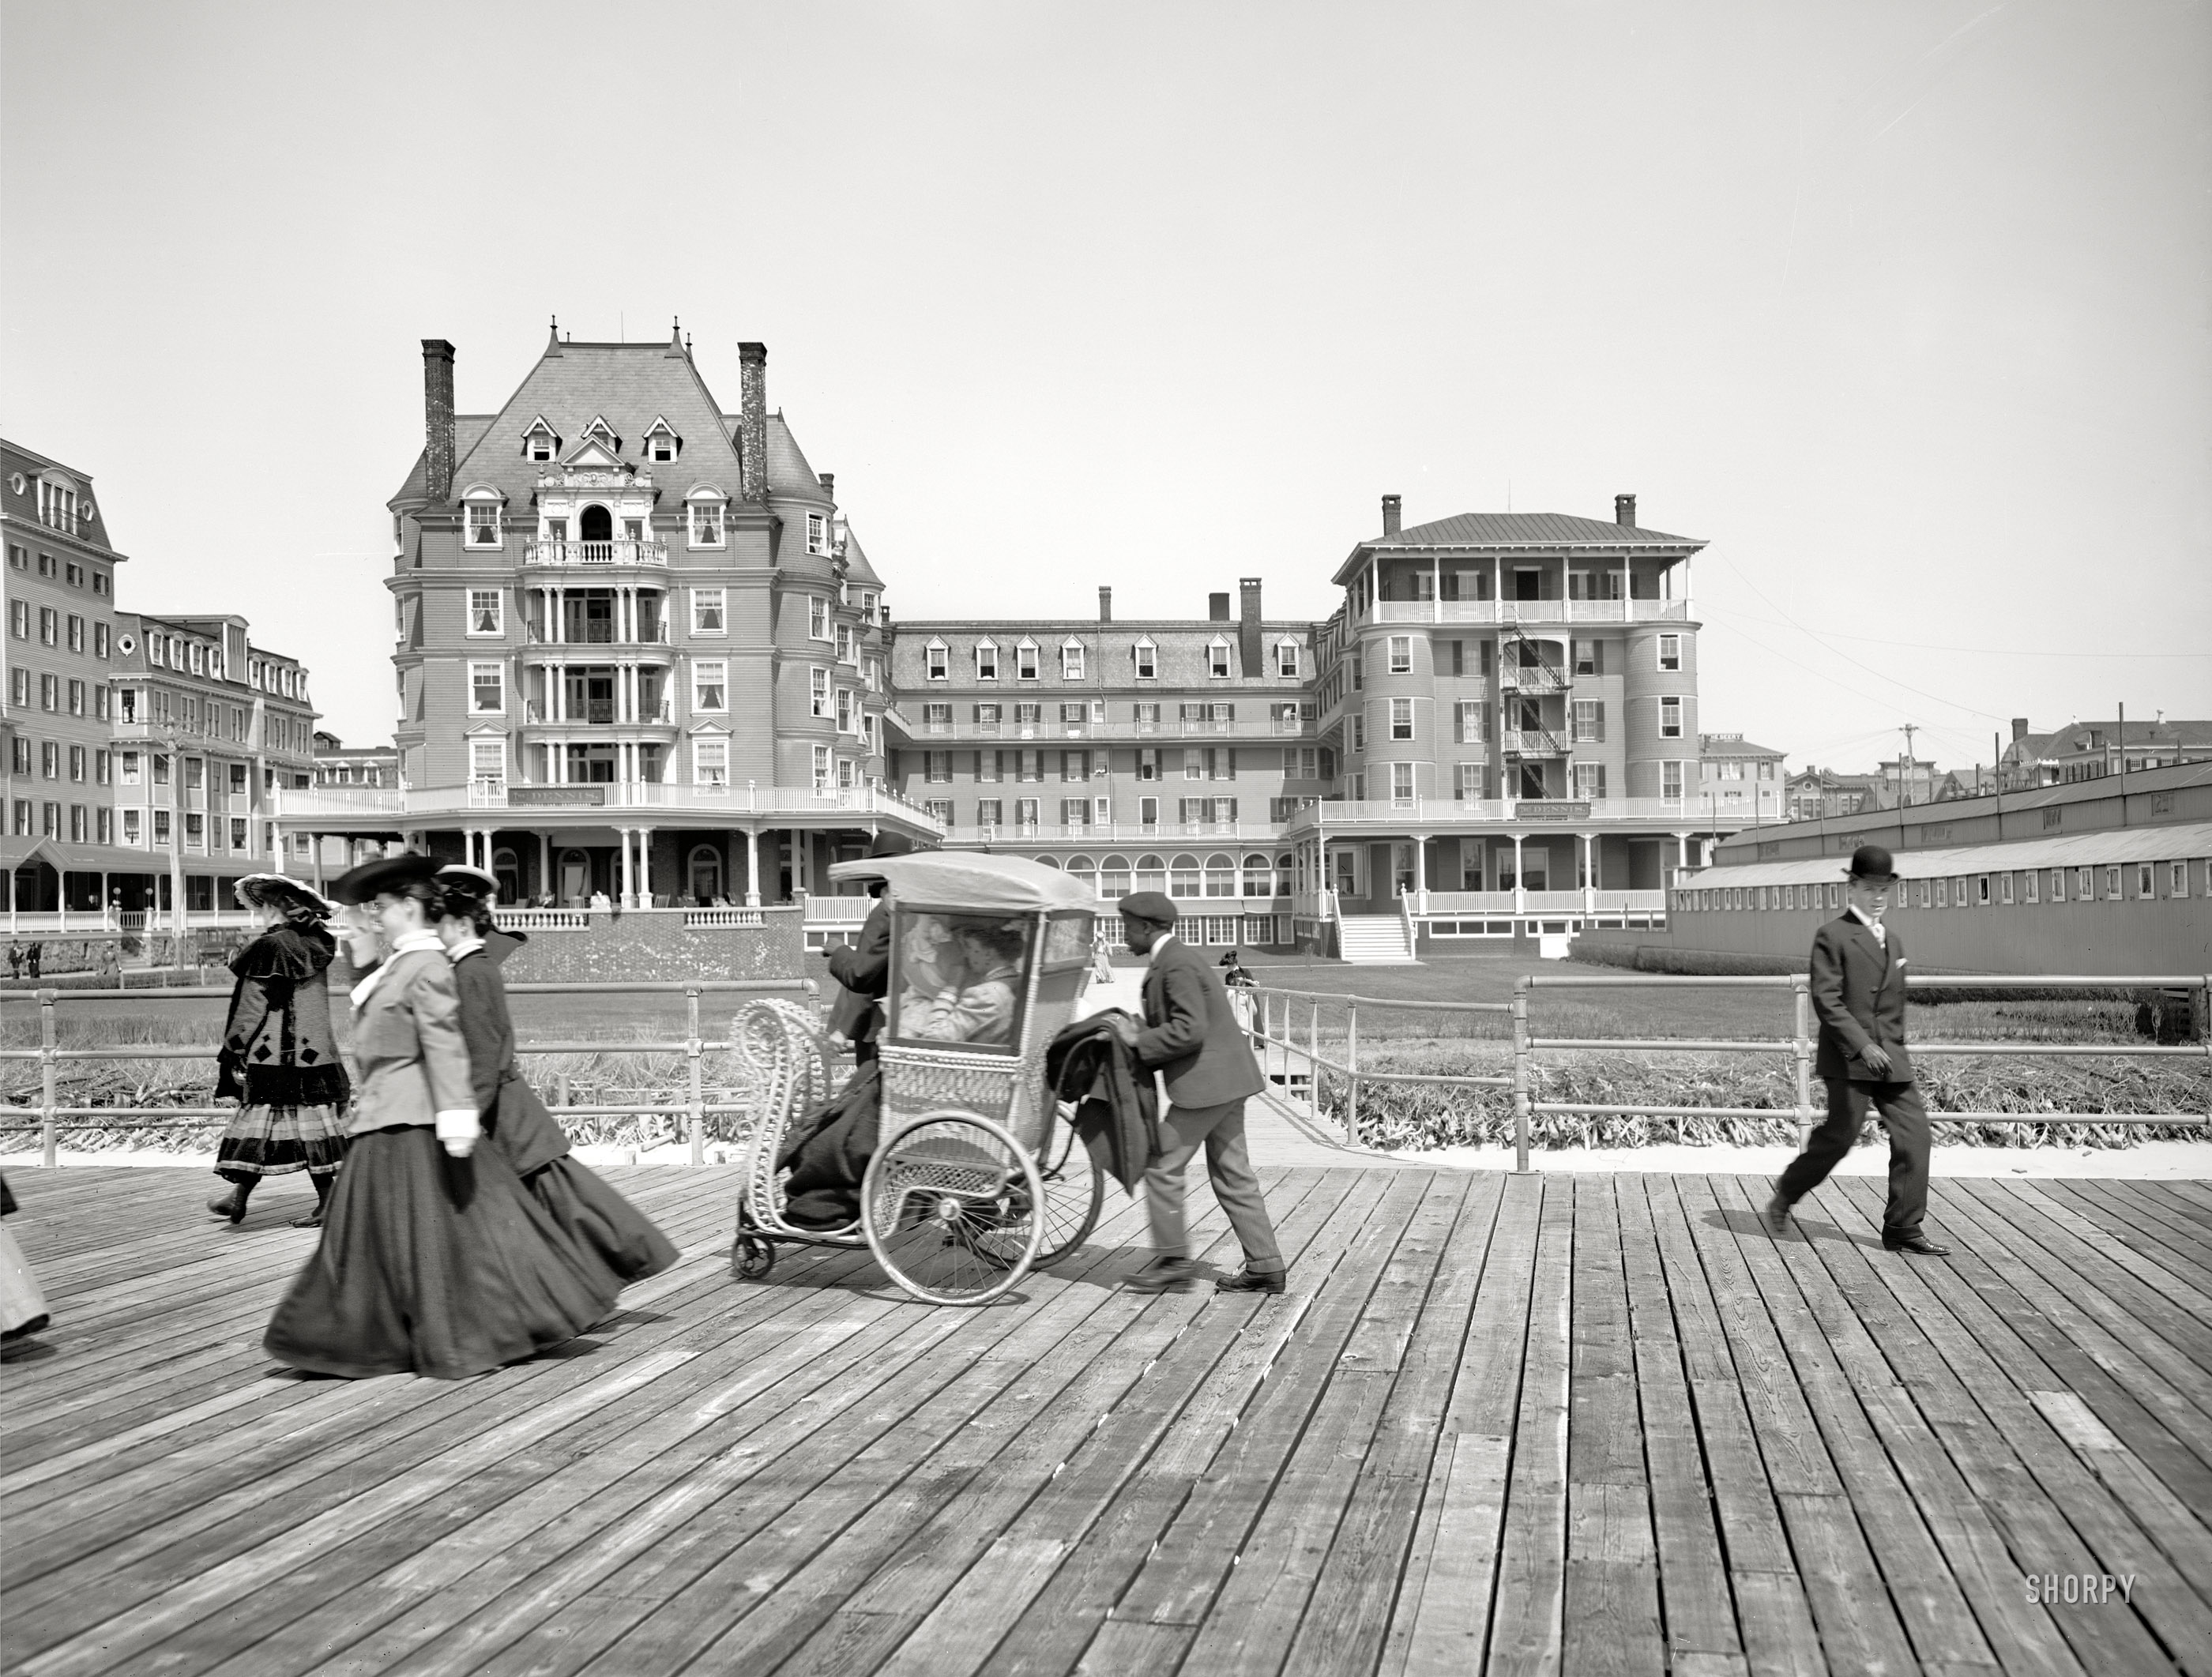 Atlantic City, New Jersey, circa 1905. "The Dennis." Where you can get pushed around on the Boardwalk. 8x10 inch glass negative. View full size.